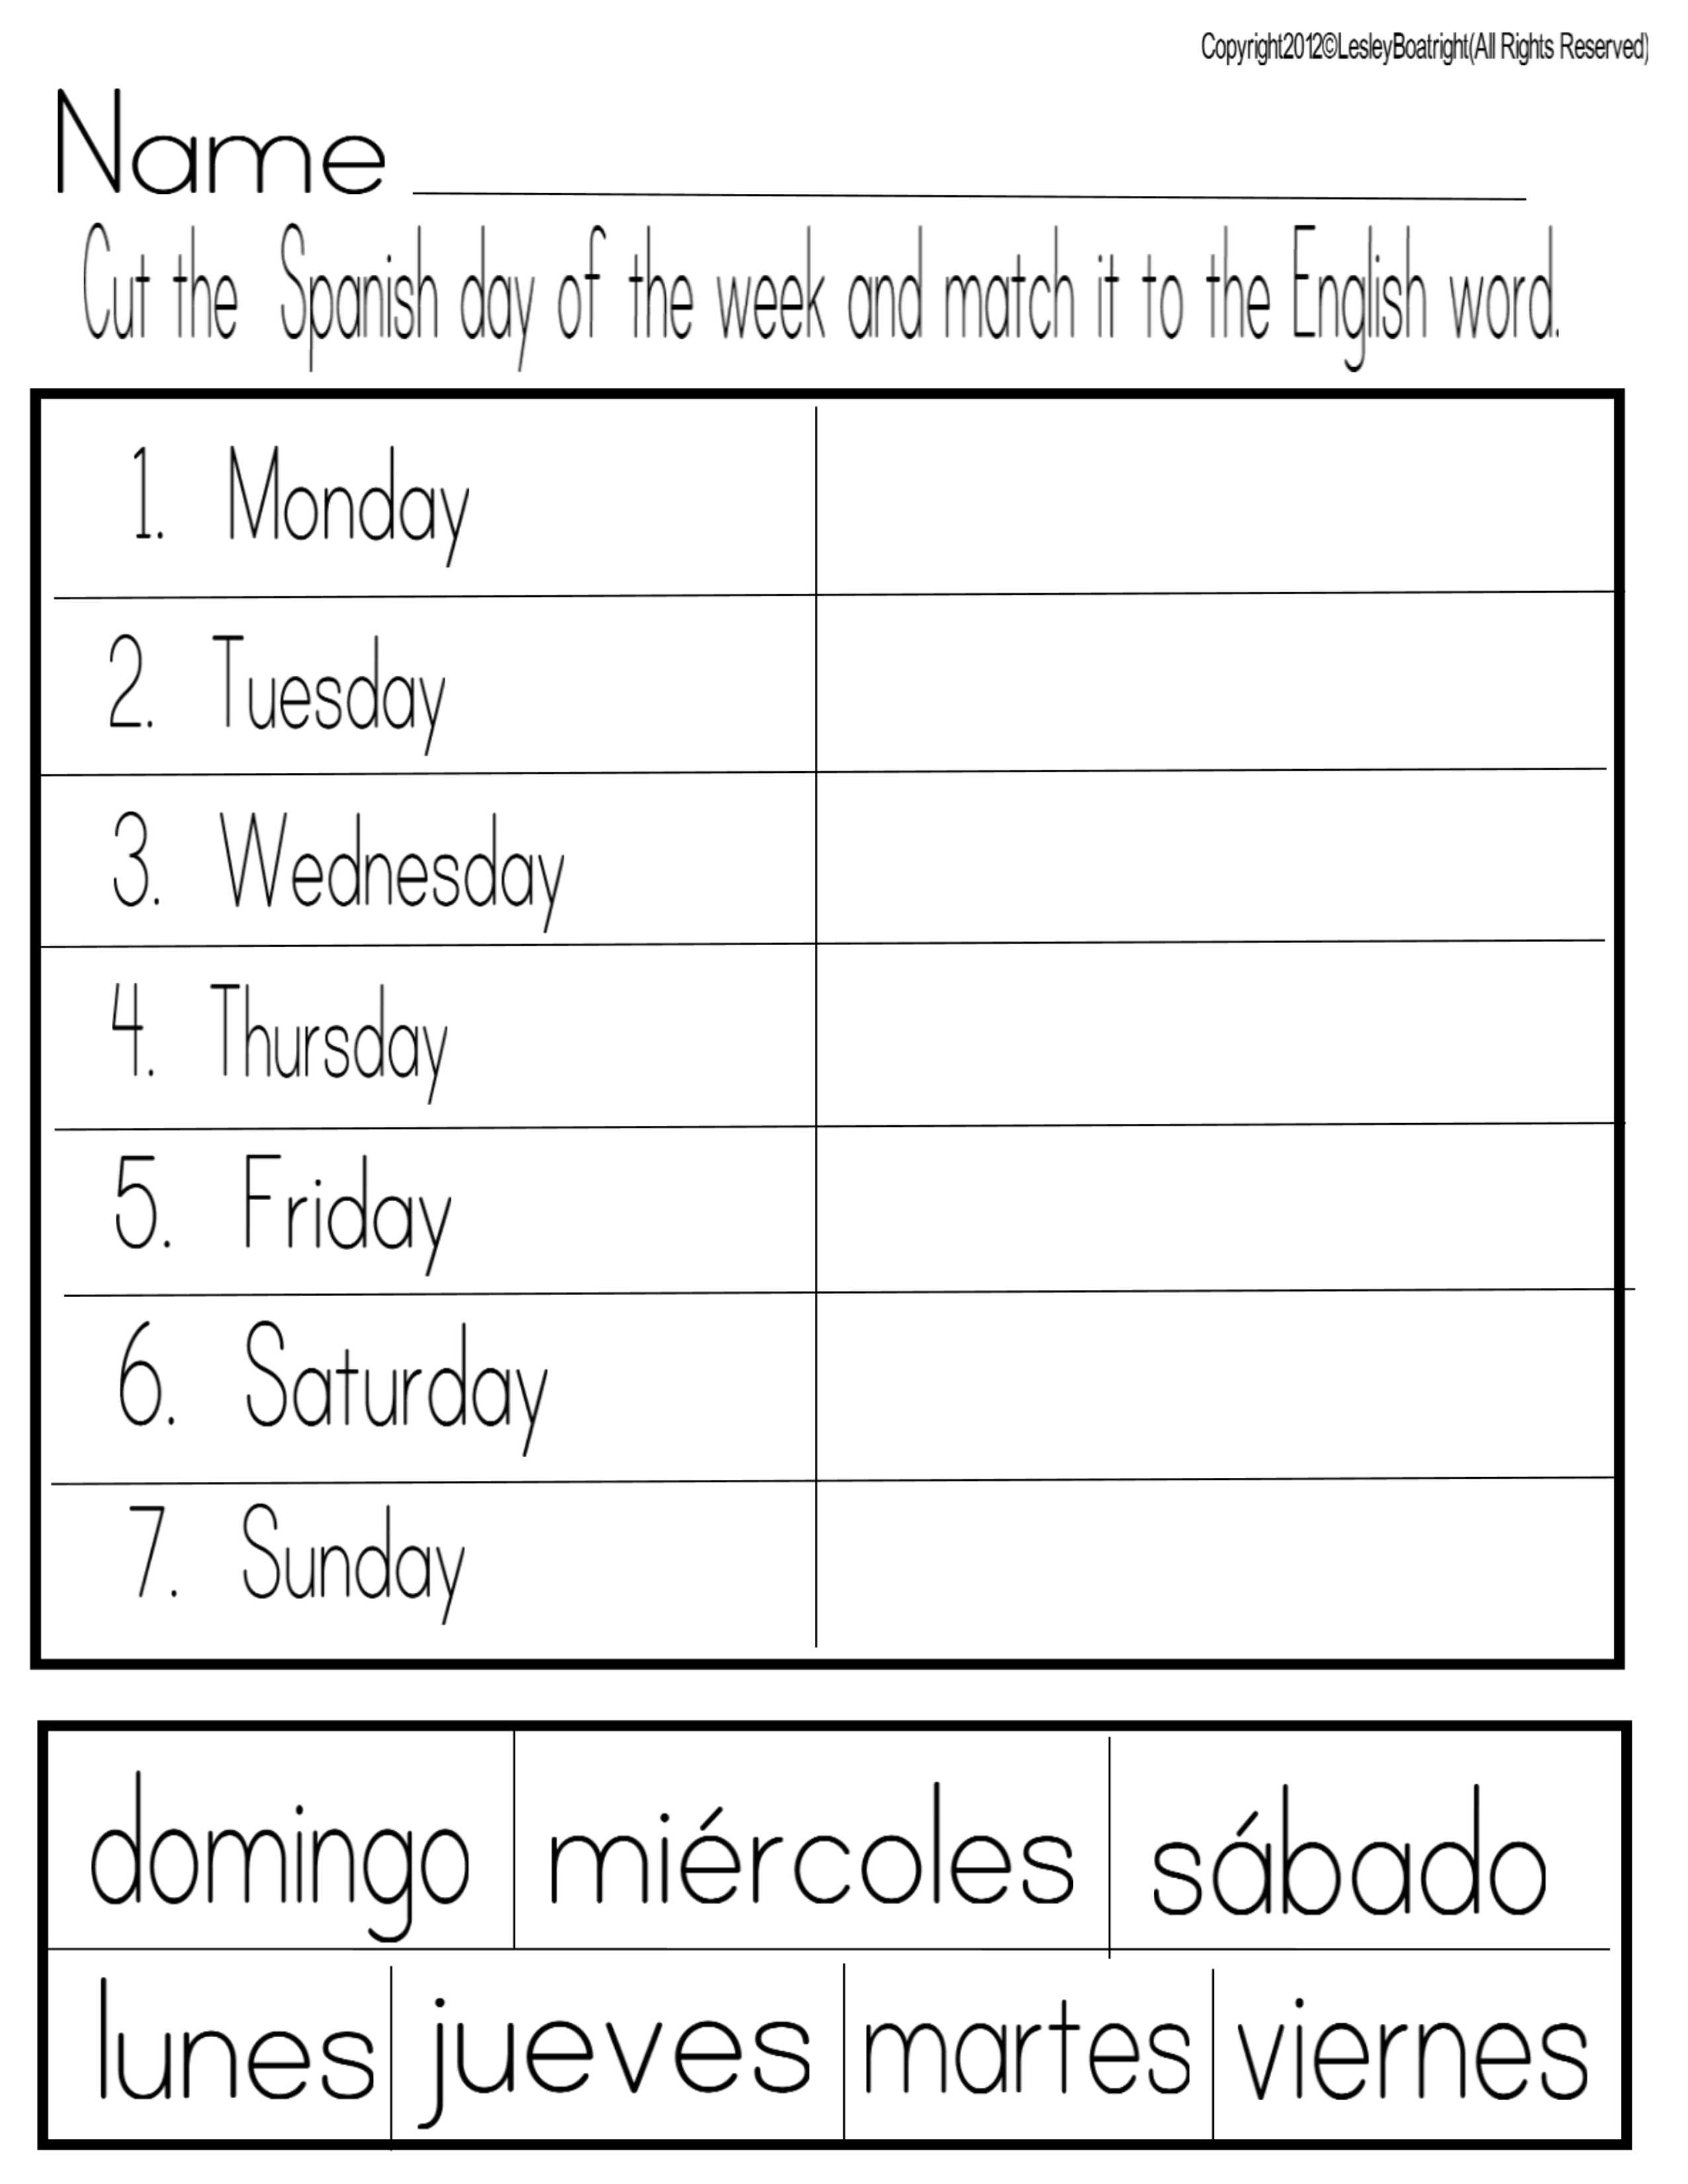 7-best-images-of-printable-spanish-worksheets-days-of-the-week-spanish-days-of-the-week